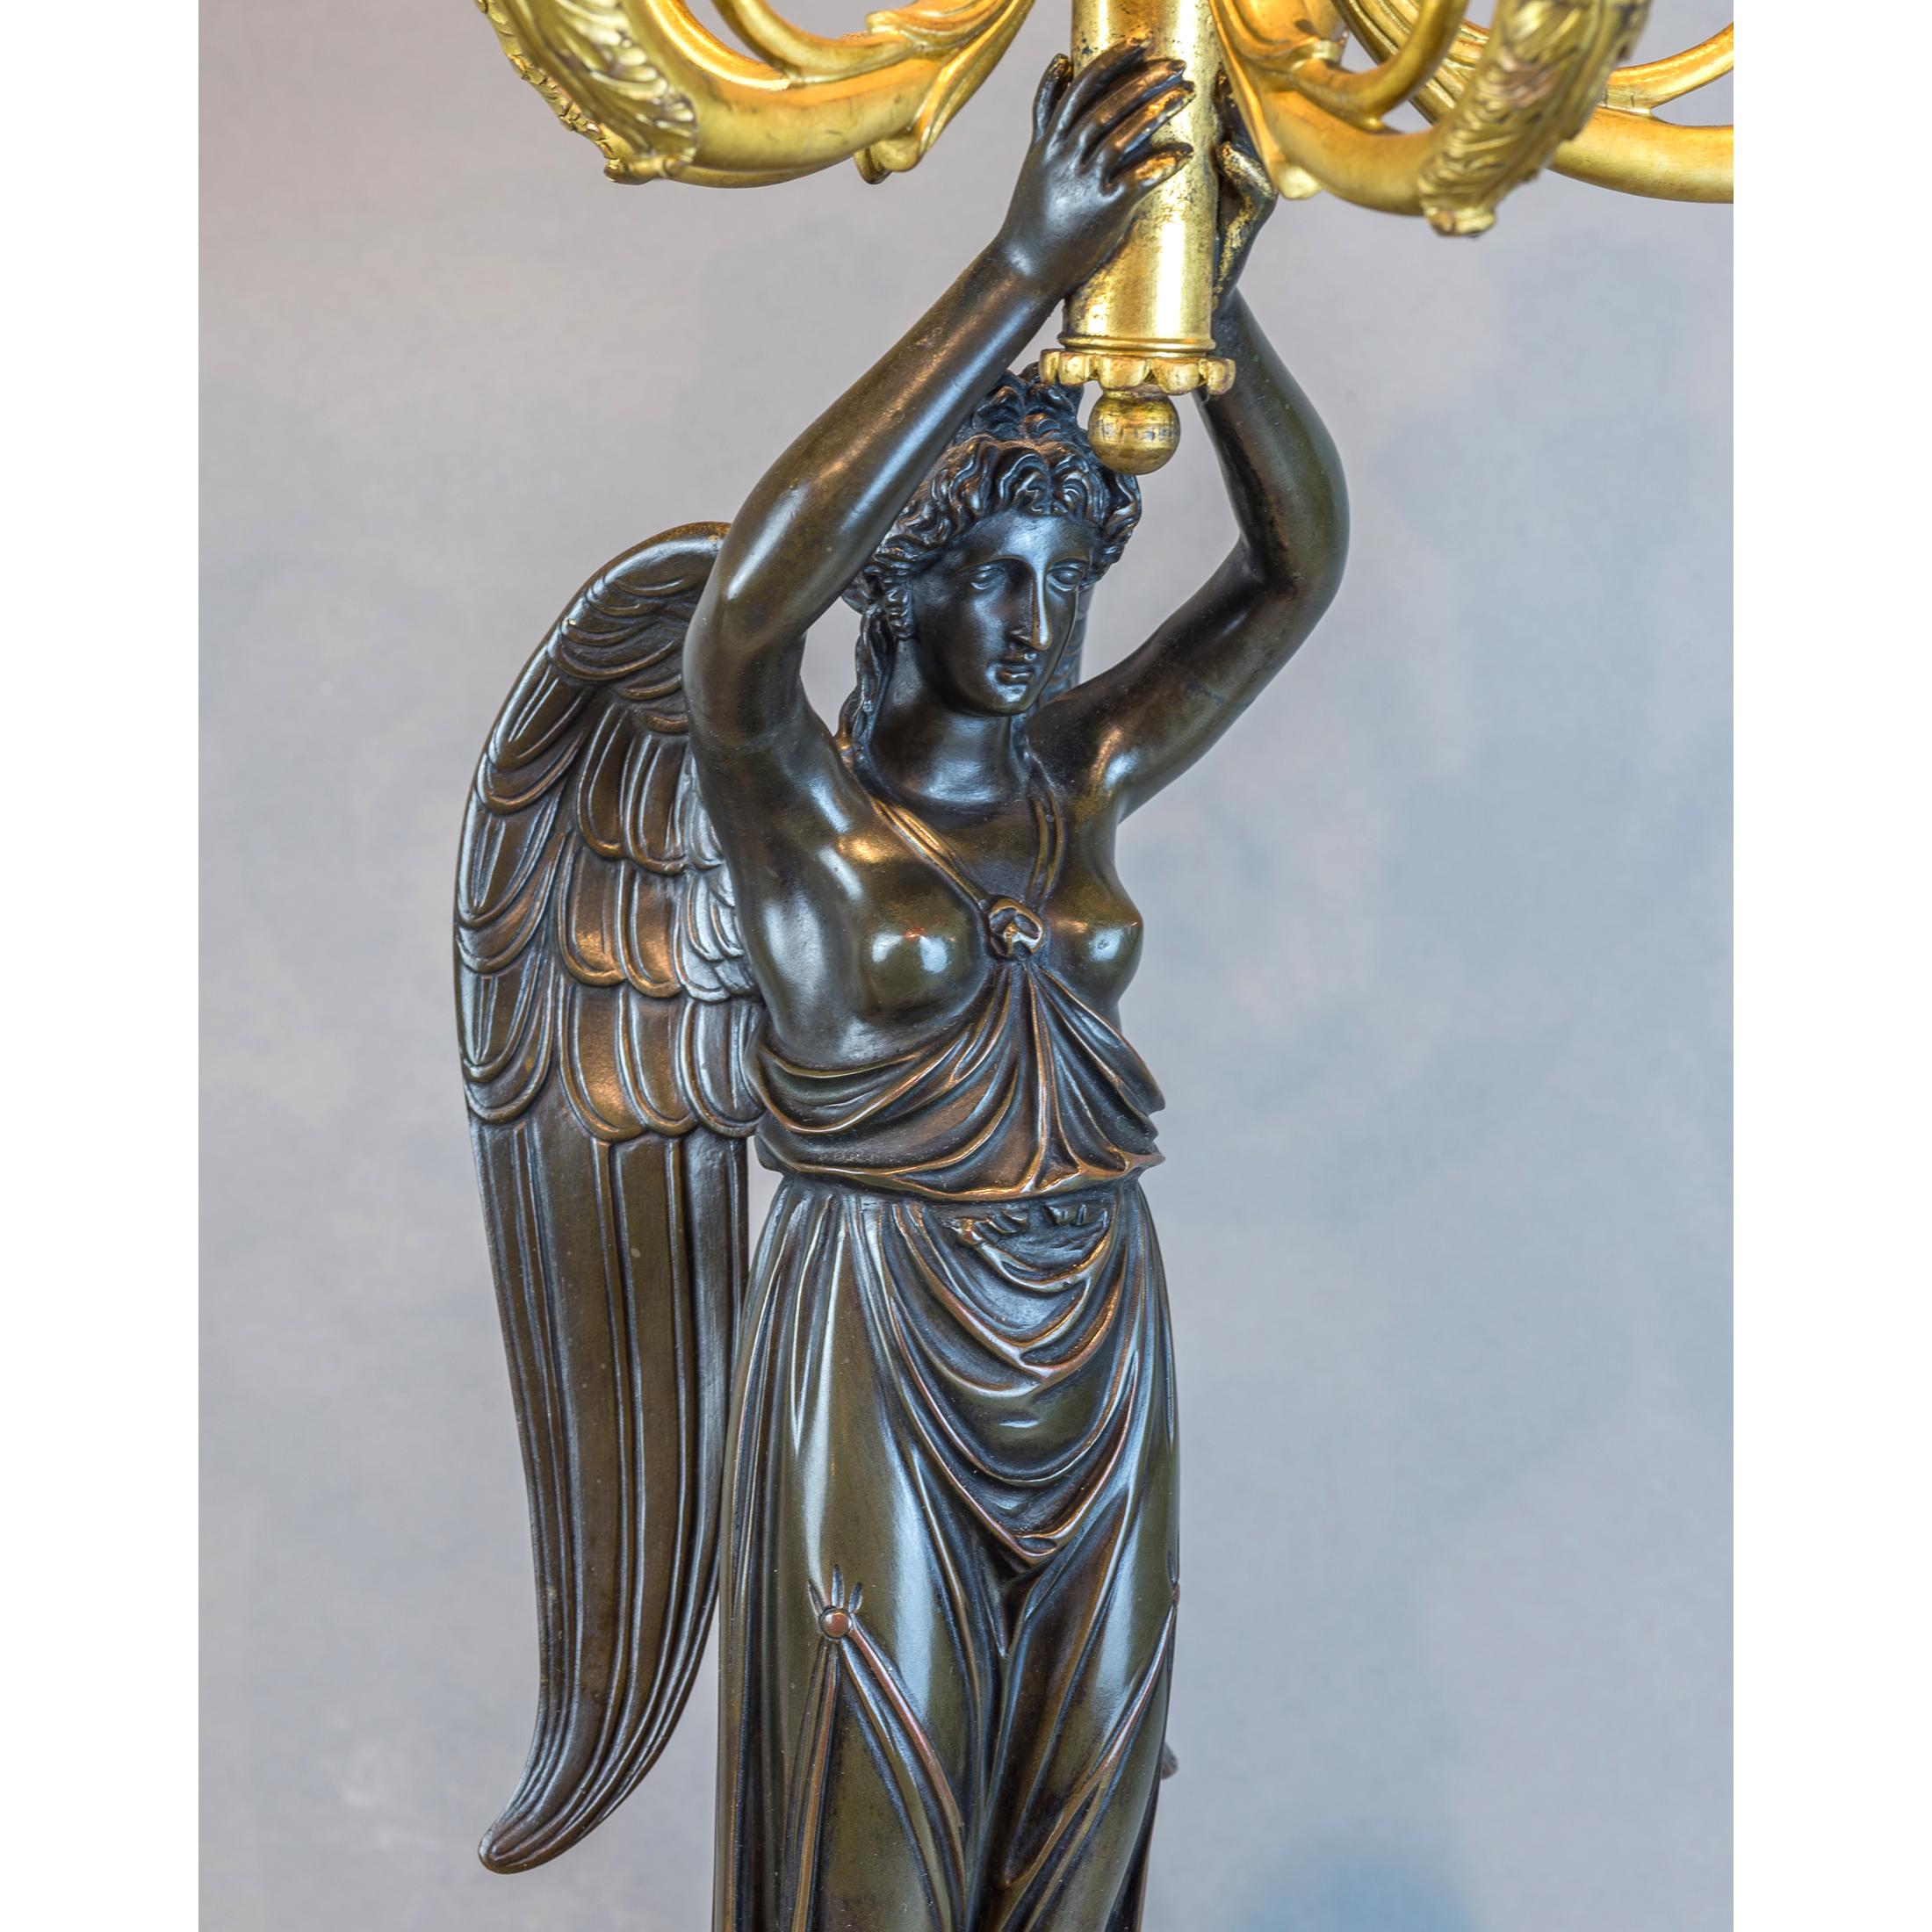  Pair of Empire Gilt and Patinated Bronze Six-Light Figural Candelabras For Sale 1